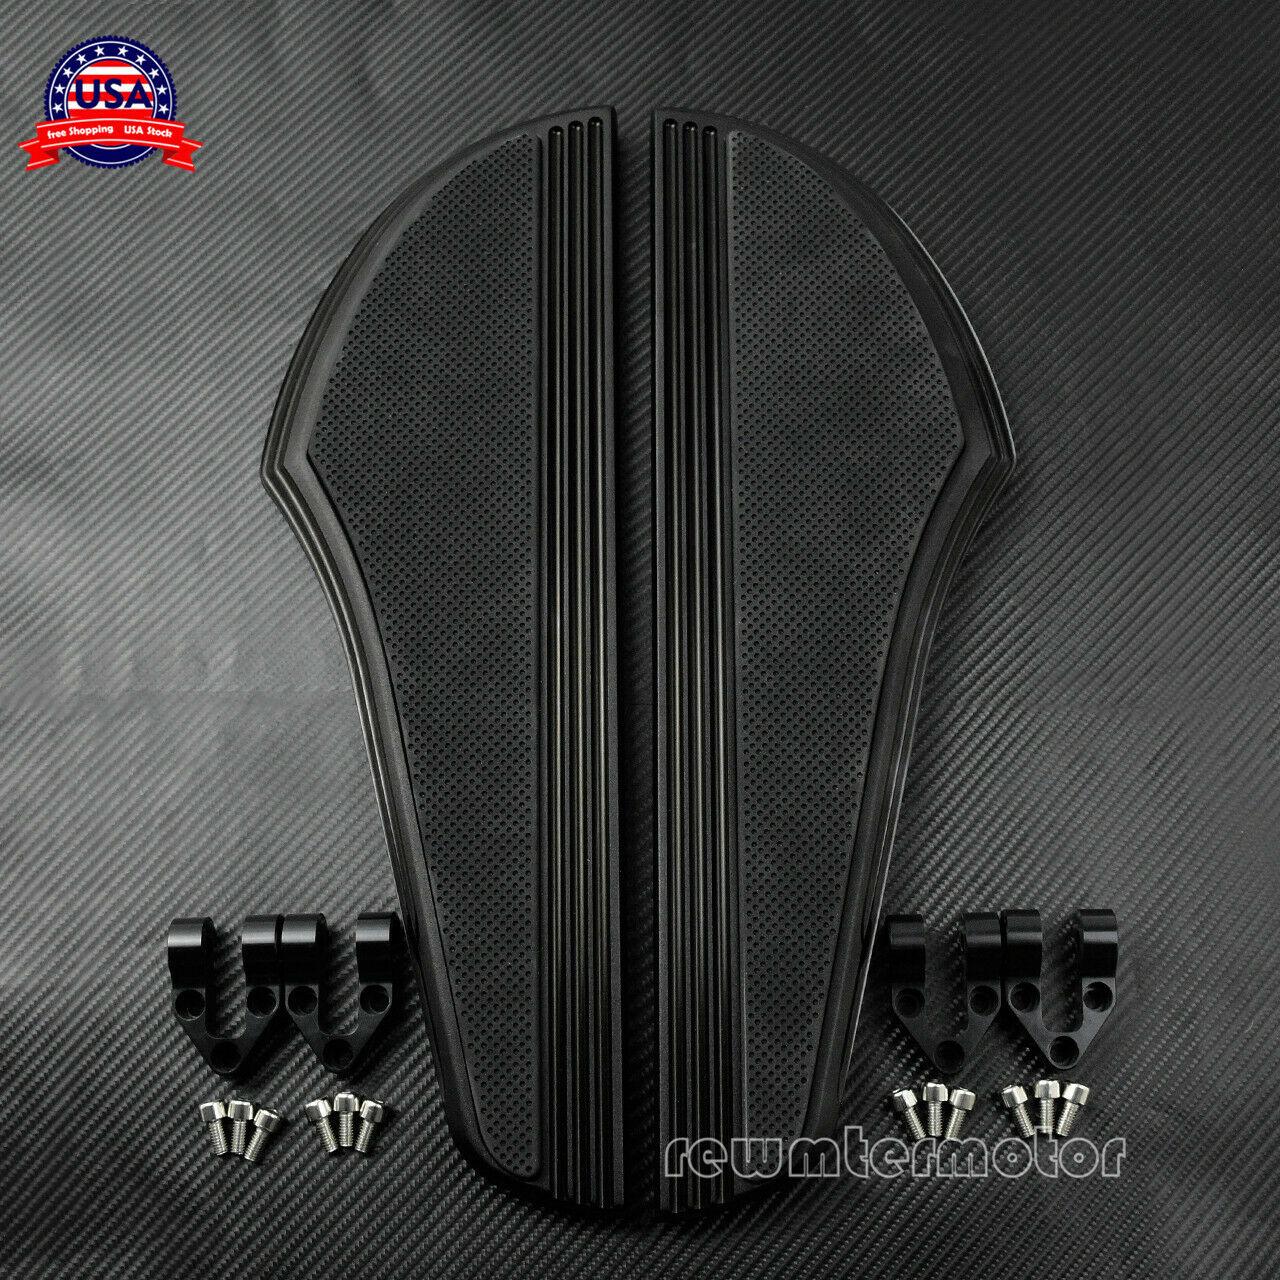 Driver Rider Footboard Floorboard Kit Fit For Harley Touring Road King 1994-2015 - Moto Life Products